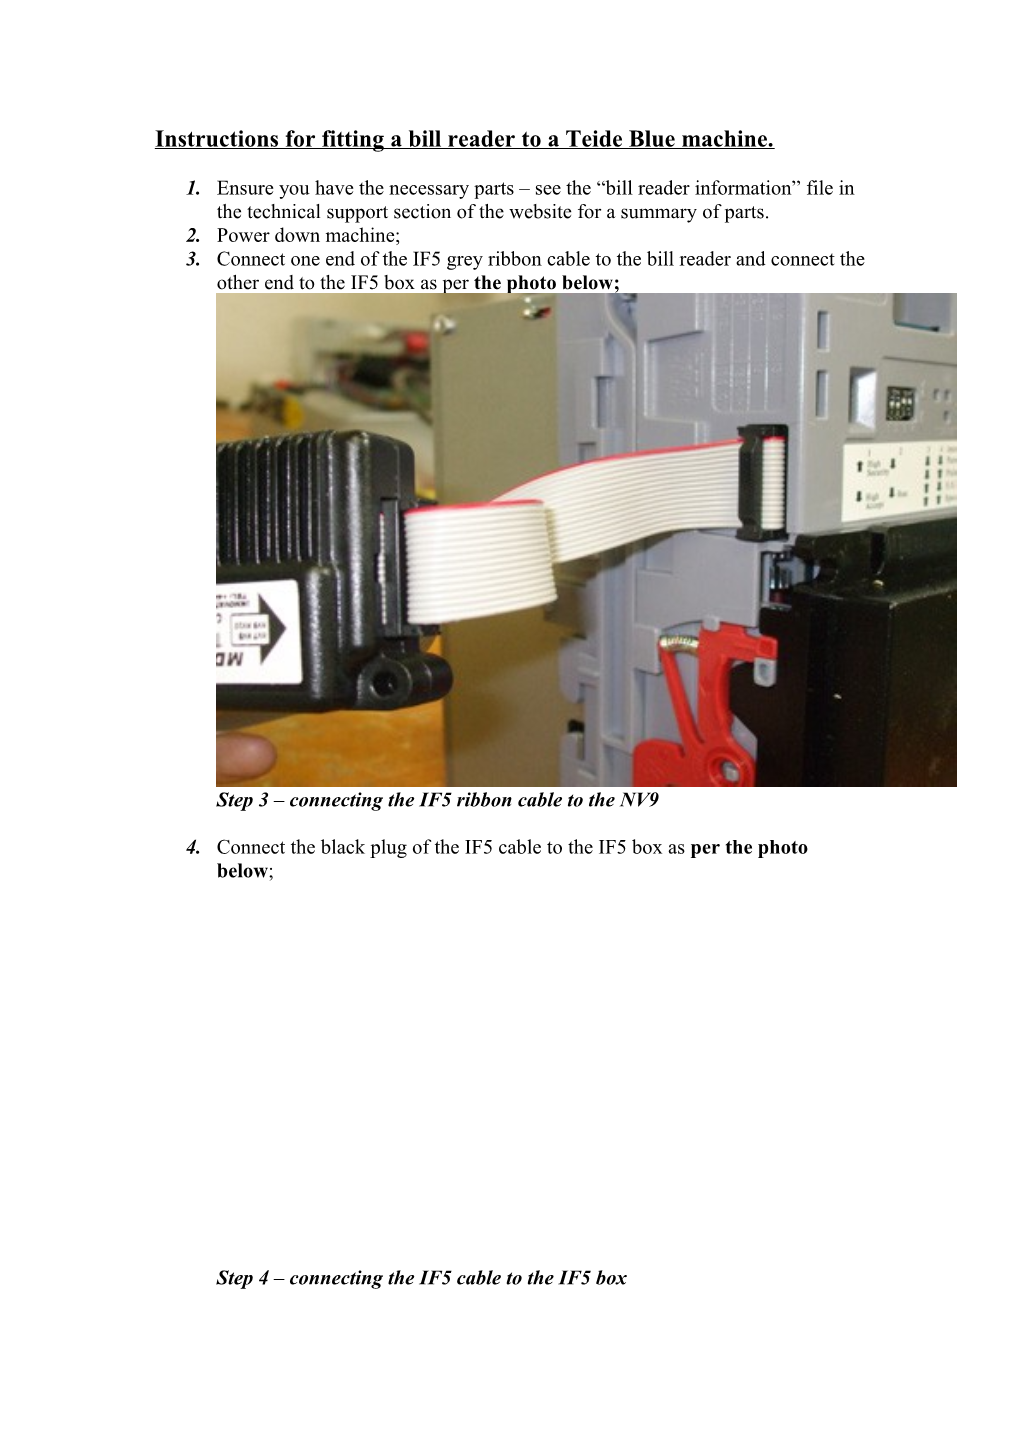 Instructions for Fitting a Bill Reader to a Vendtech Machine